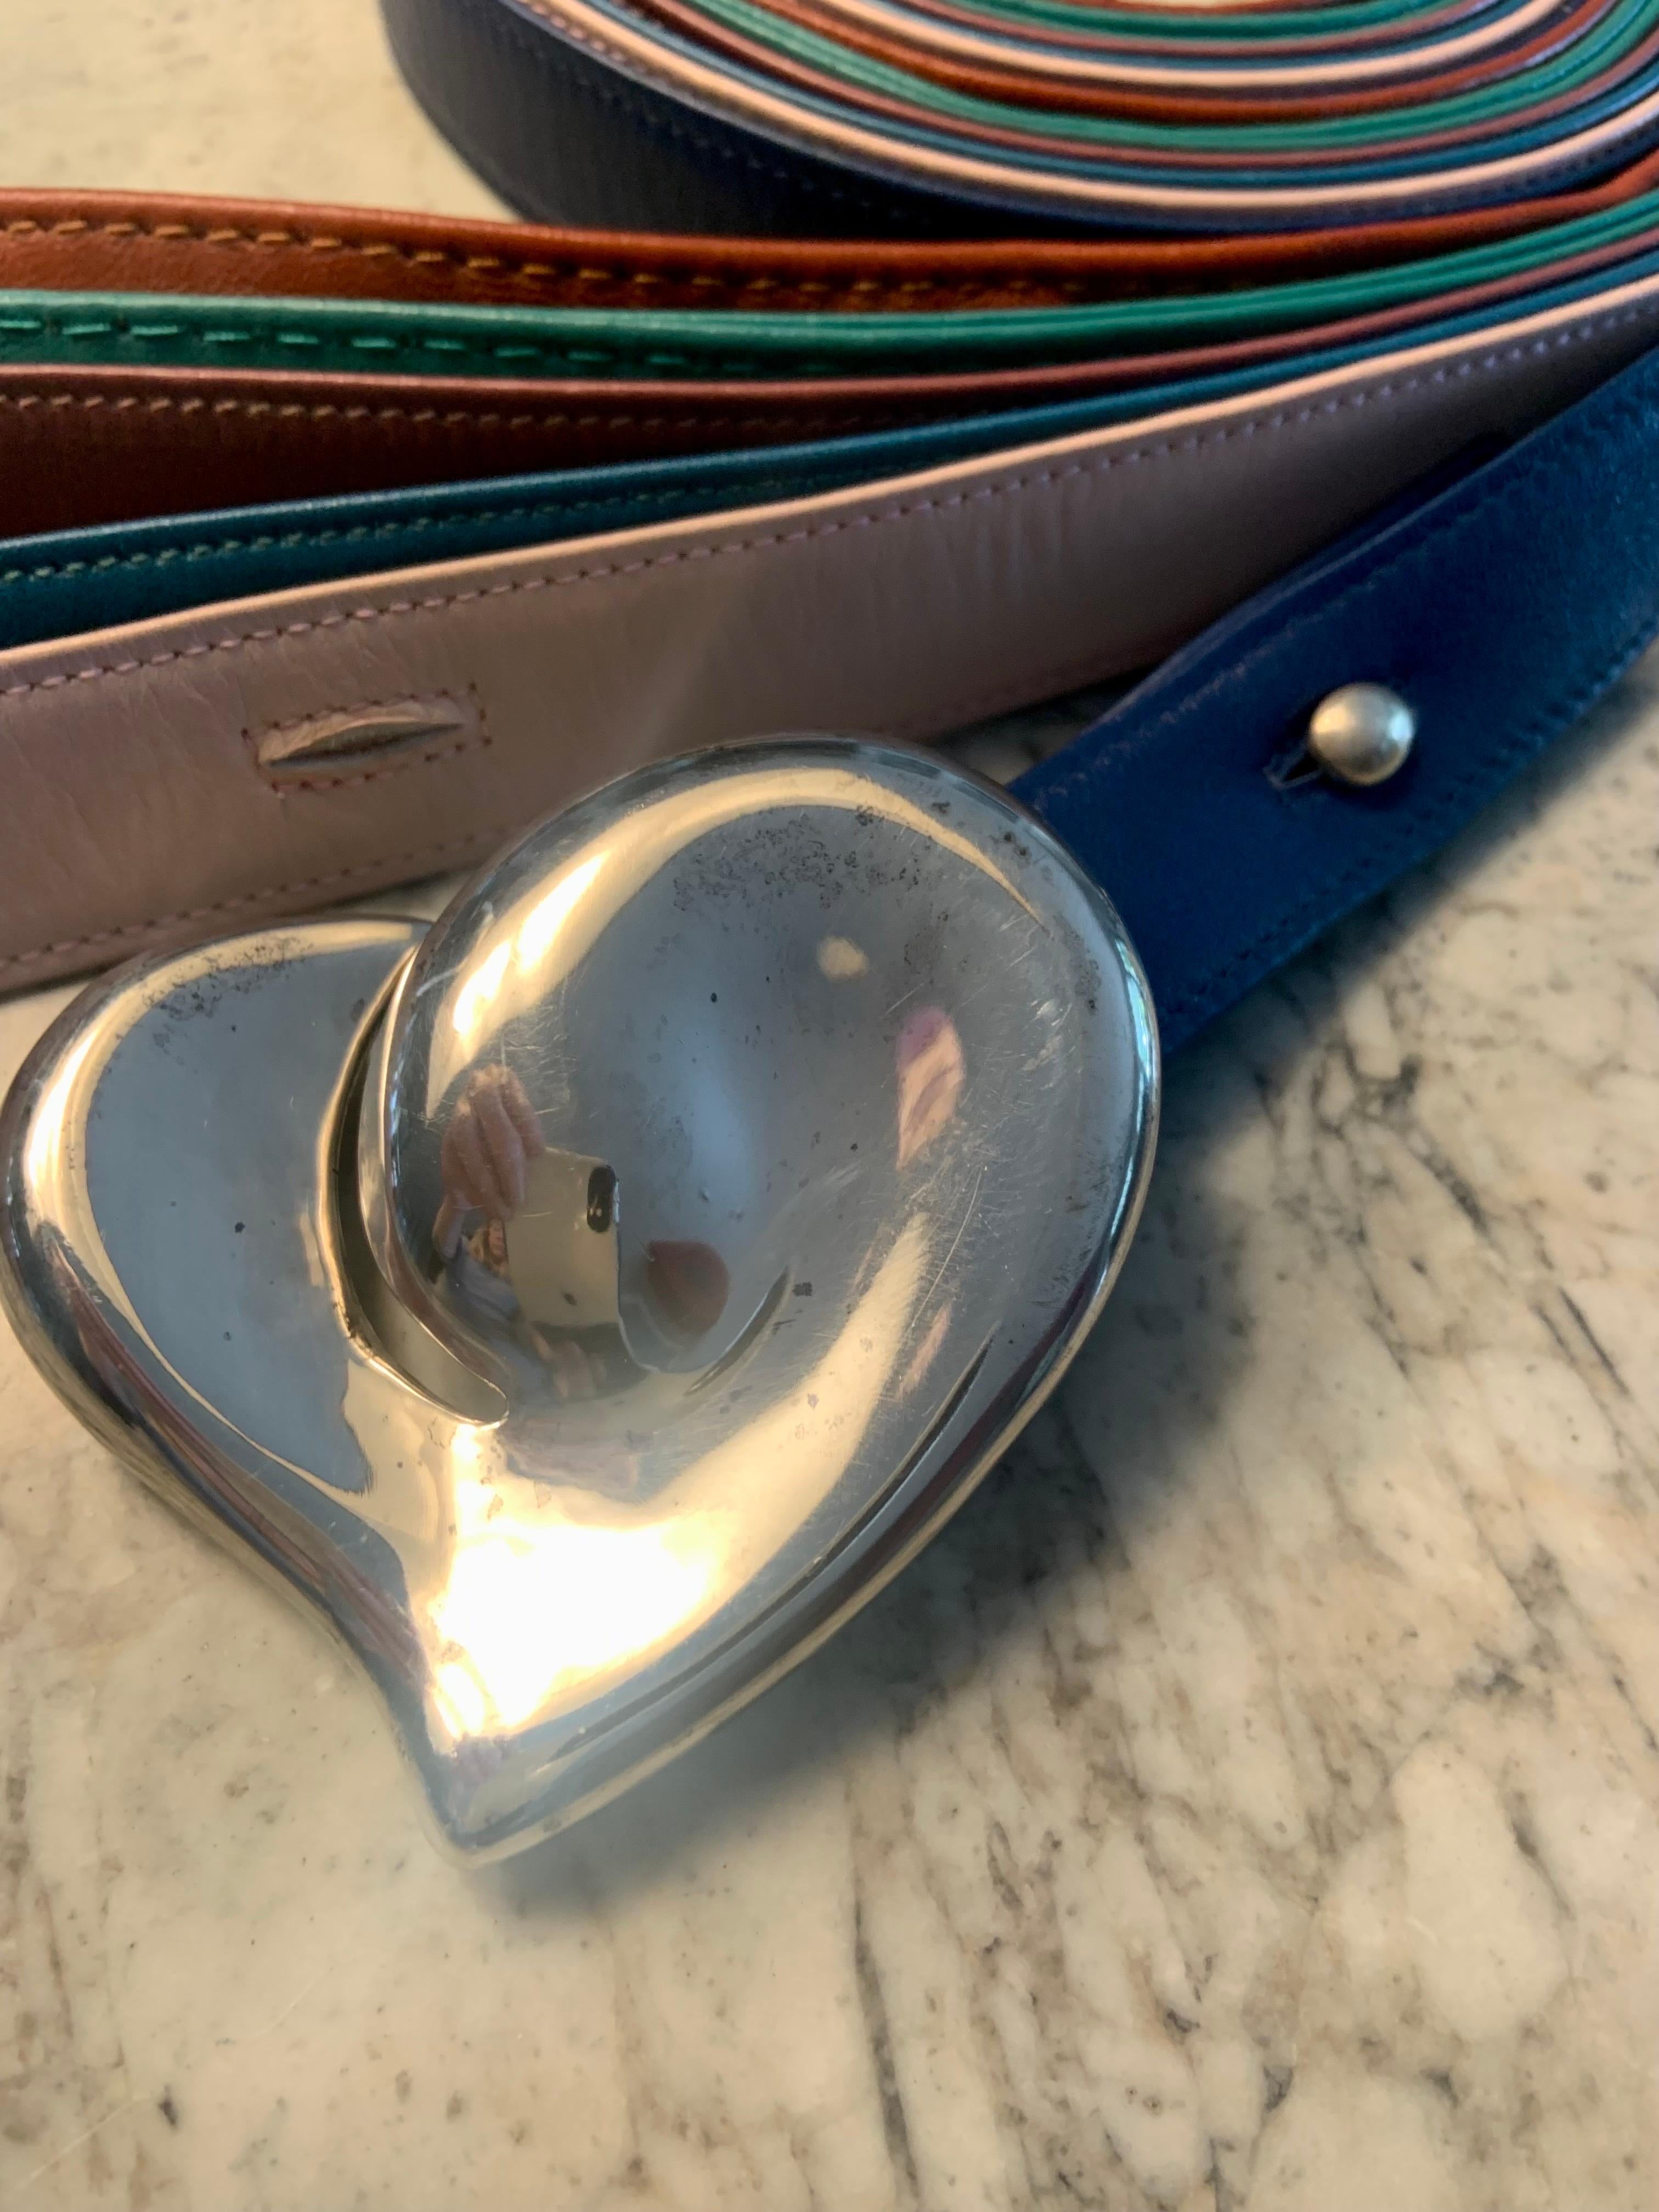 One of the early designs from Elsa Peretti this 1970's full heart buckle and button are fully marked Peretti, Tiffany & Co. and Sterling. The closure is an interesting and innovative design. 
 There are six leather belts, four of the belts are